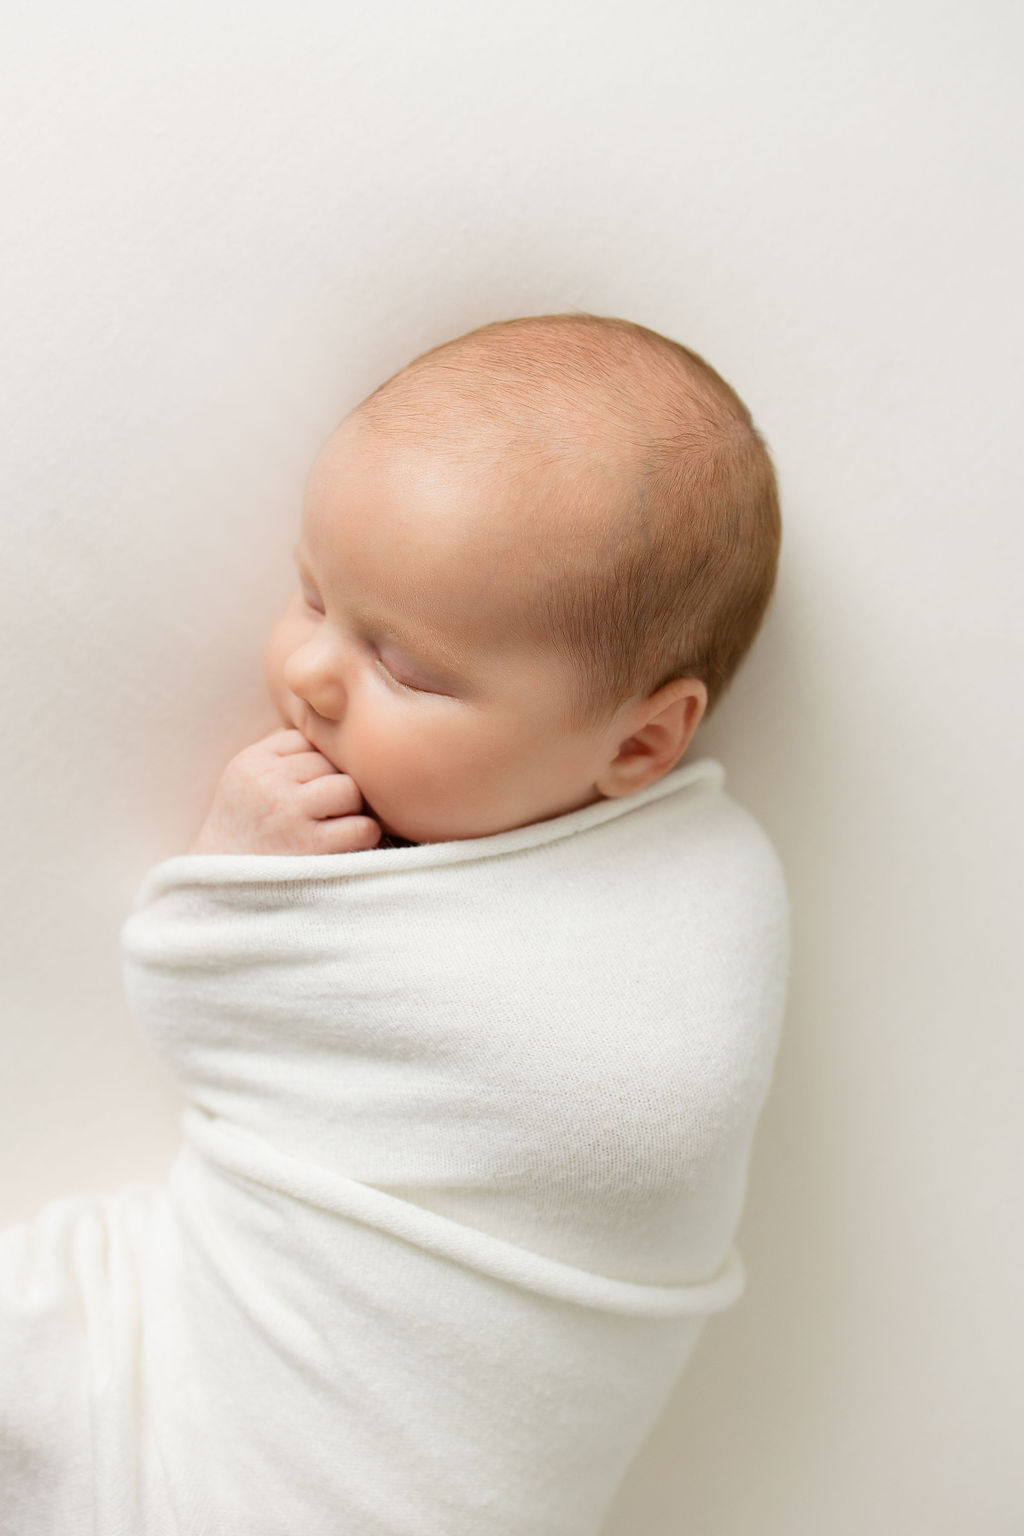 Newborn baby sleeps with fingers curled under mouth in a studio precious faces in 3D